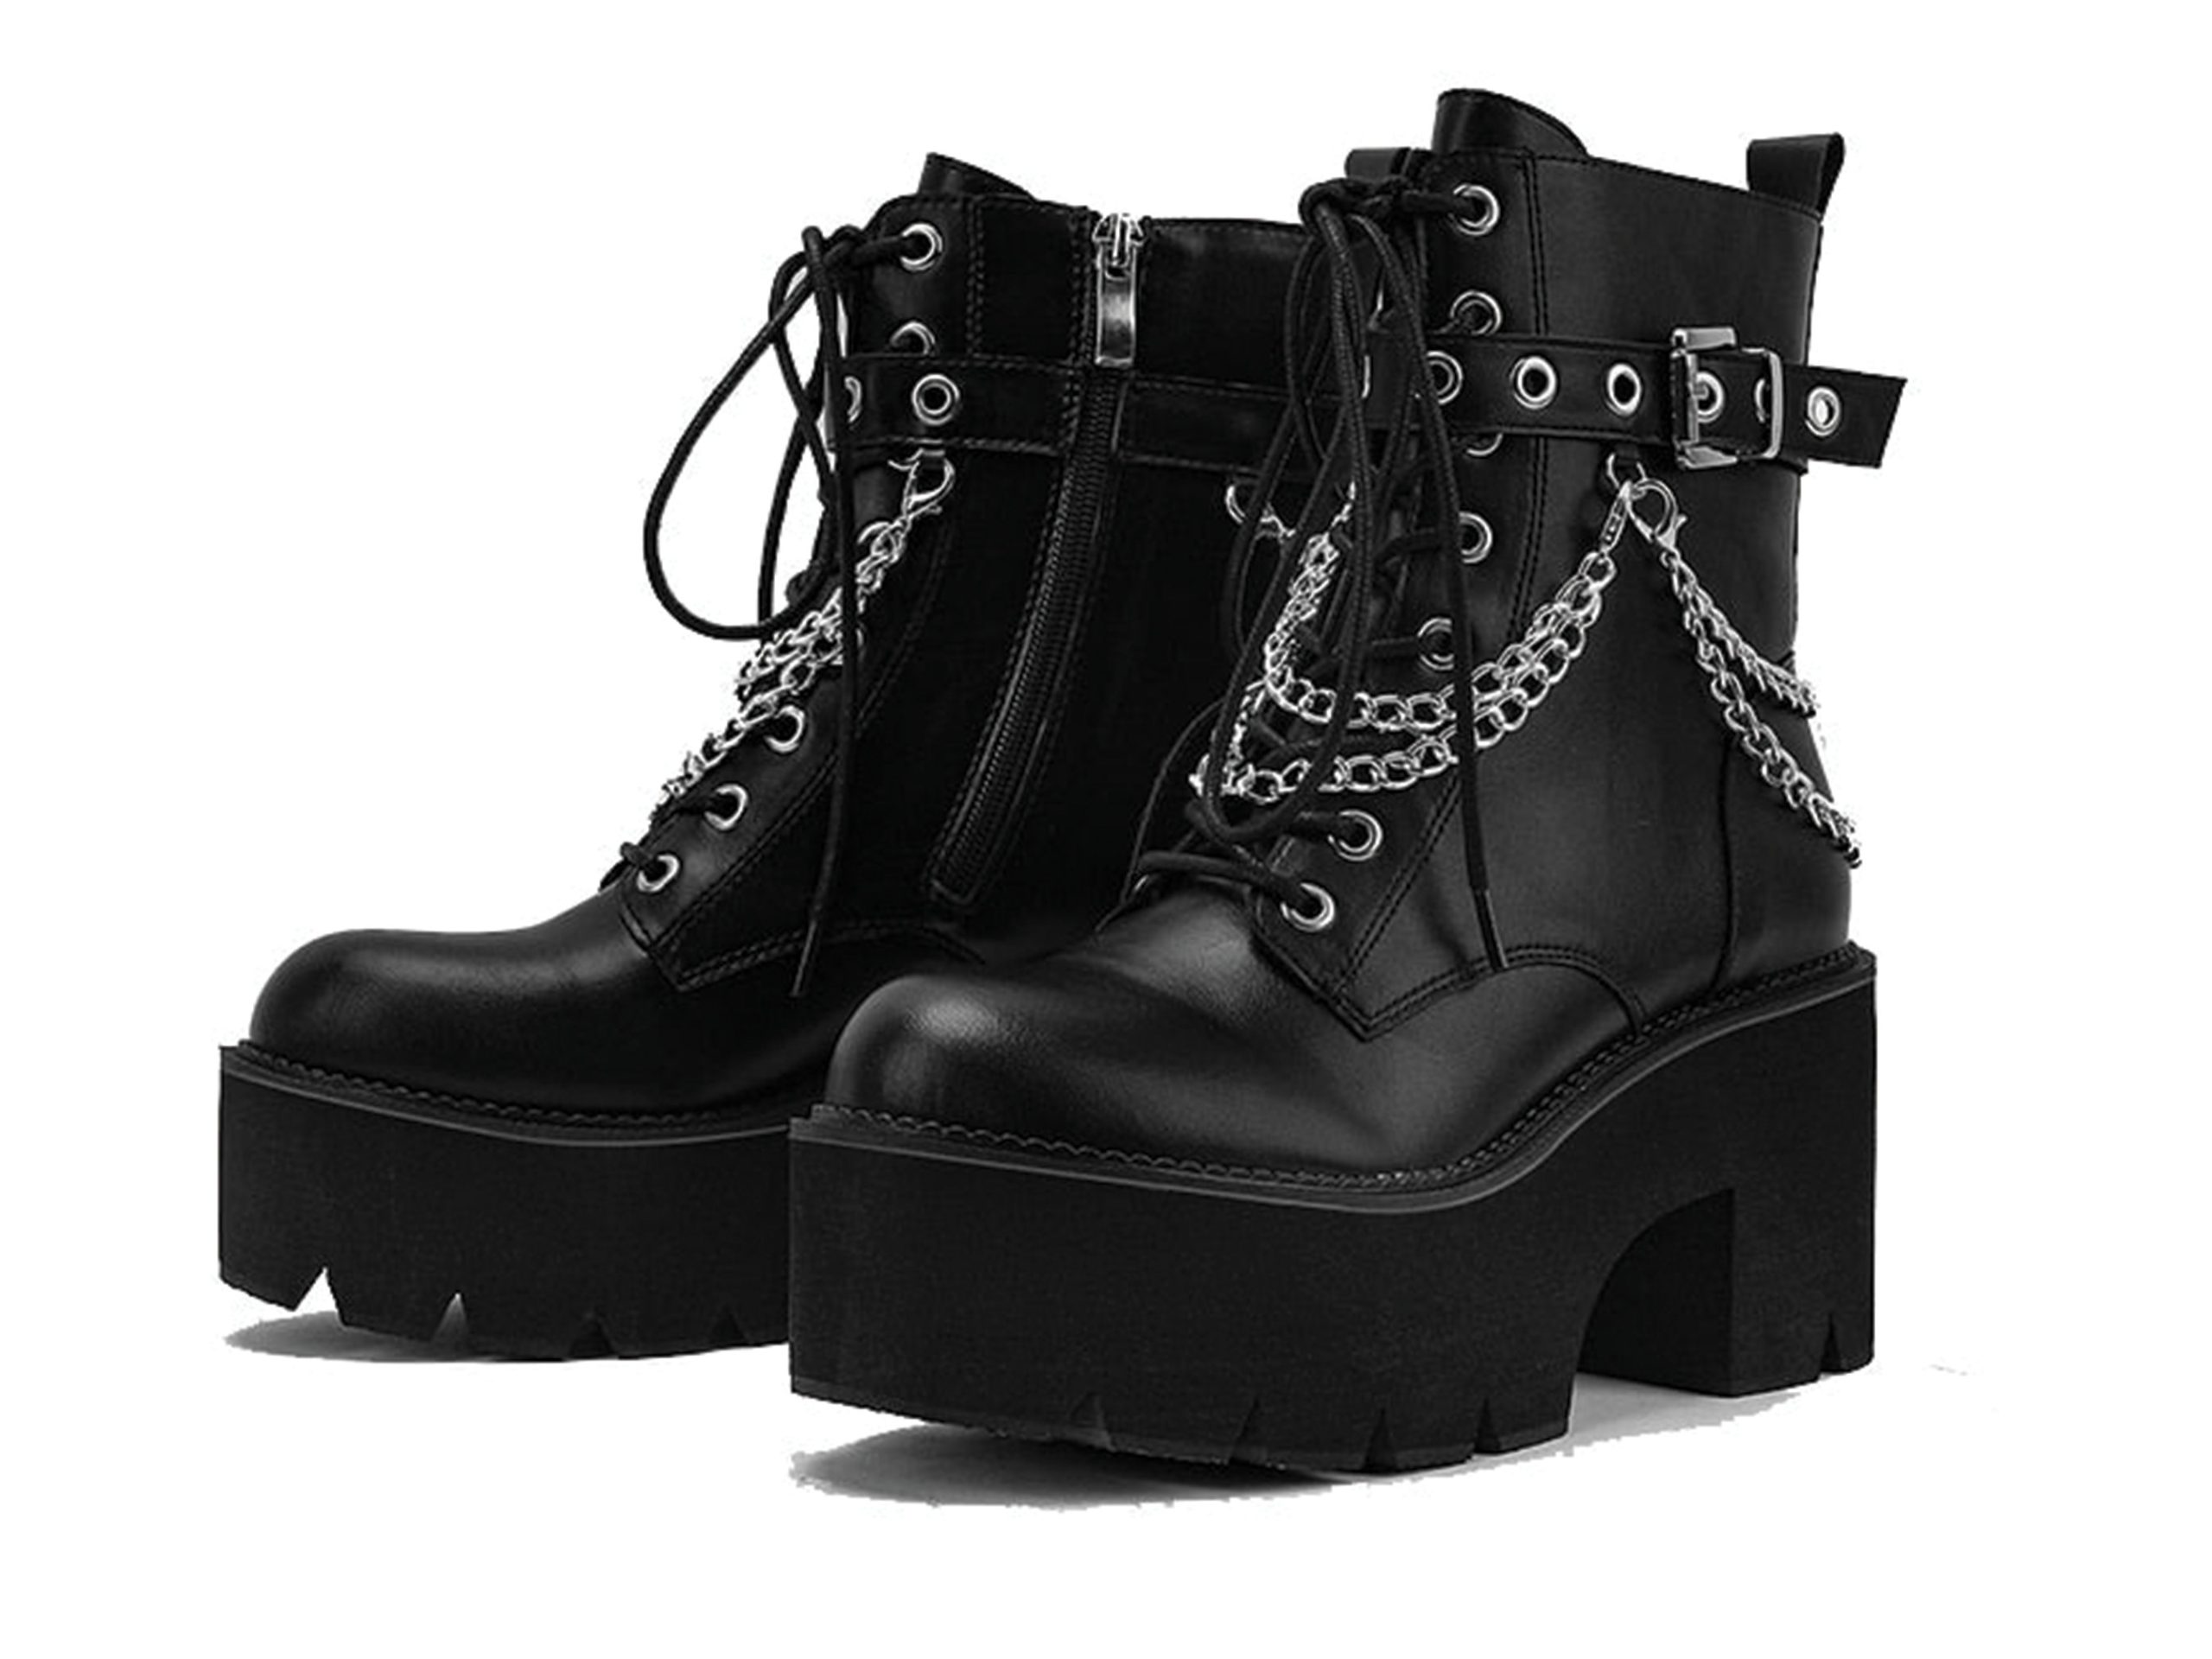 Y2K Gothic Chunky Platform Motorcycle Biker Boots